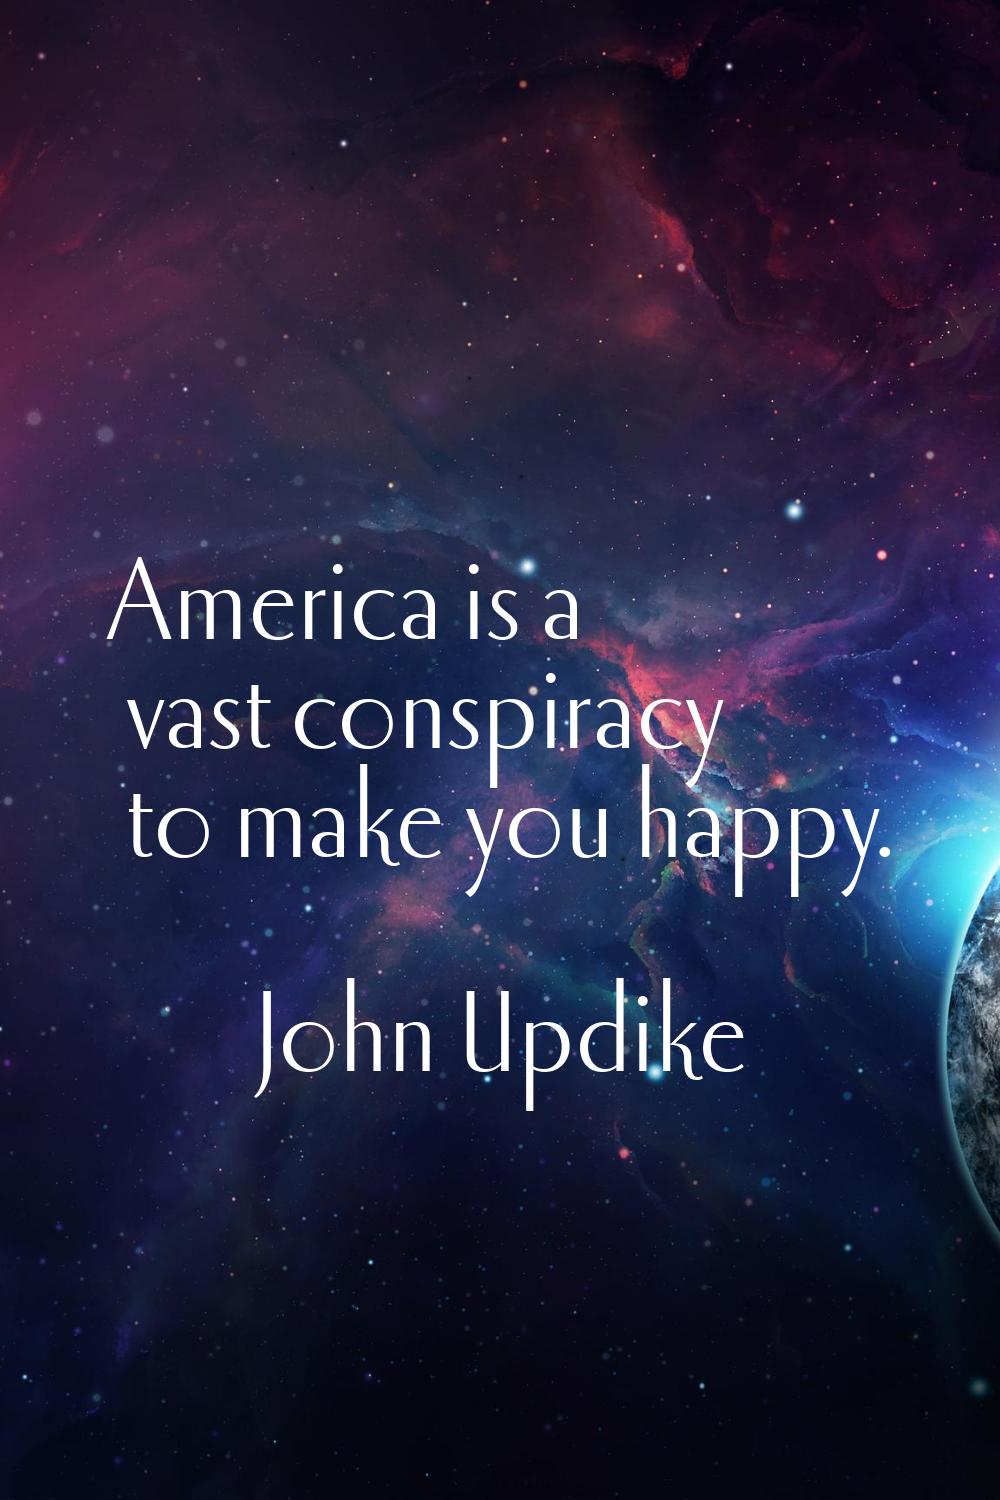 America is a vast conspiracy to make you happy.